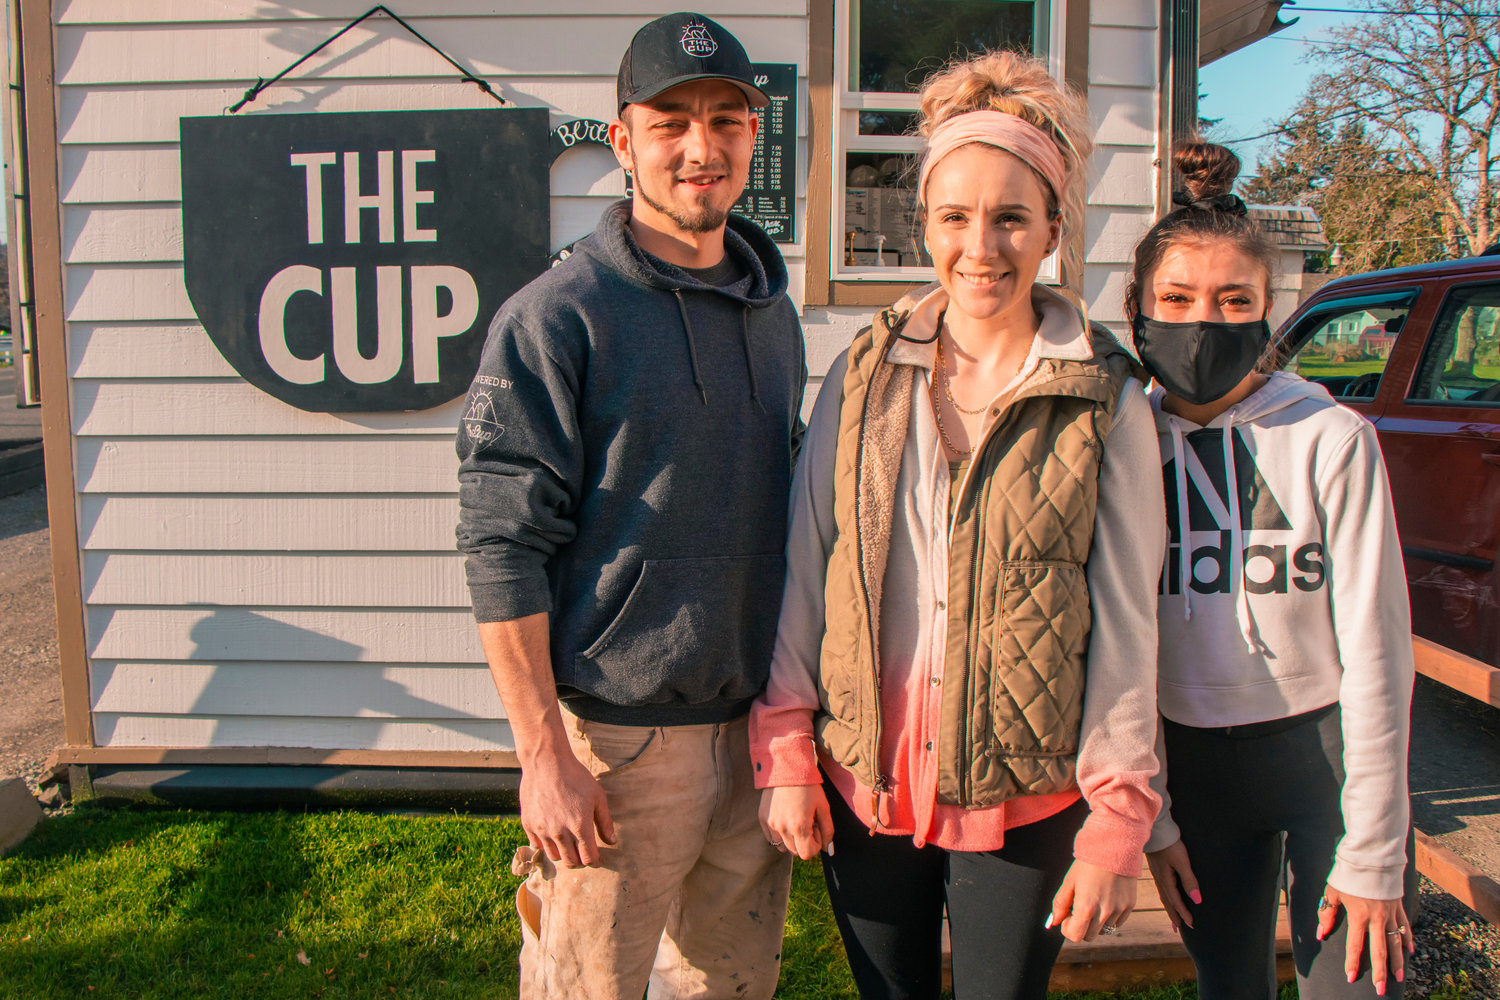 From left to right, Marco Bertucci and Jessi Gilliam, owners of The Cup in Centralia, and employee Alyssa Dougherty pose for a photo outside their coffee stand on Tuesday.